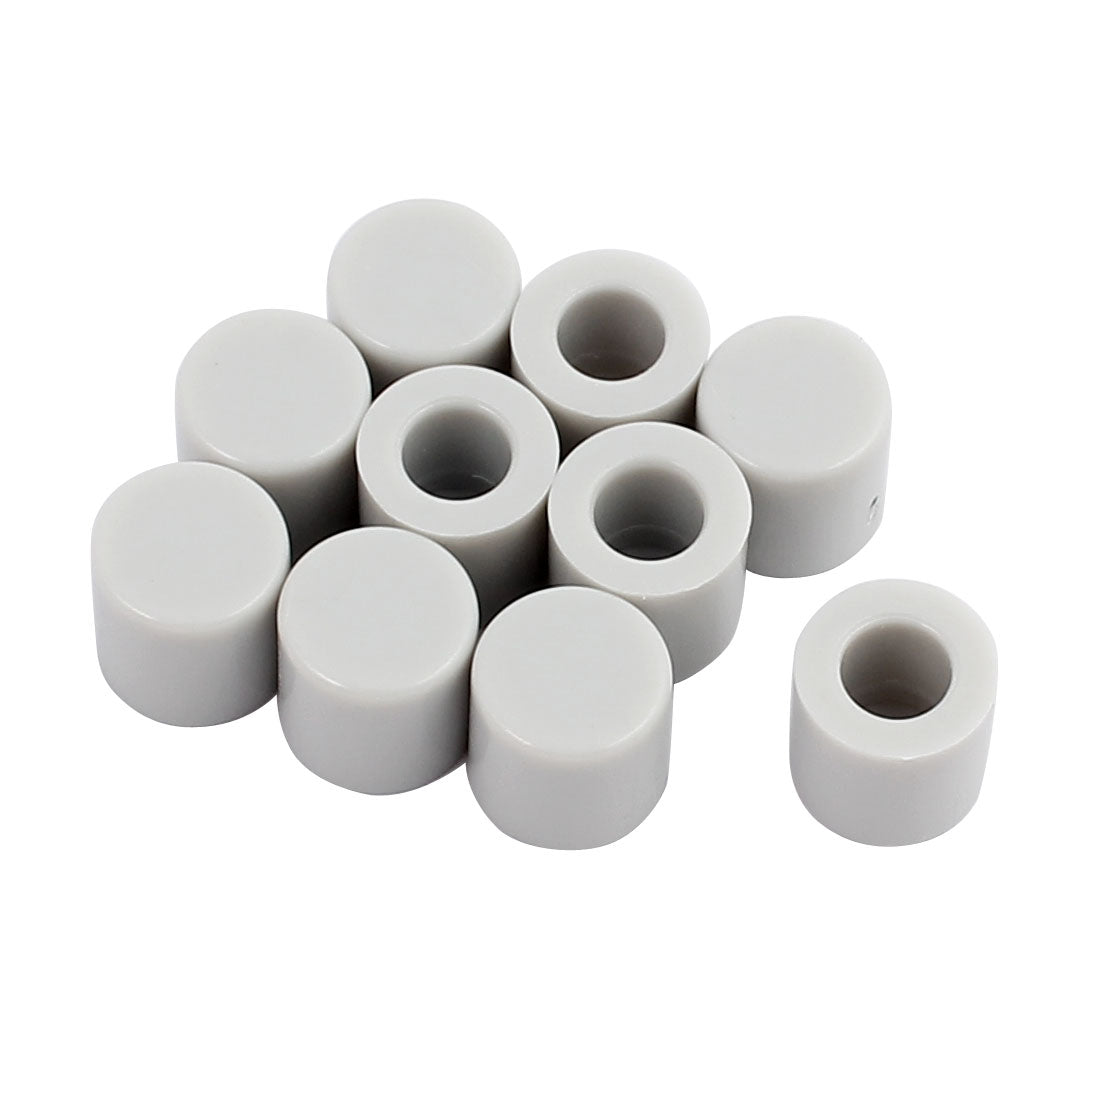 uxcell Uxcell 10Pcs Round Shaped Tactile Button Caps Covers Protector Gray for 6x6mm Tact Switch